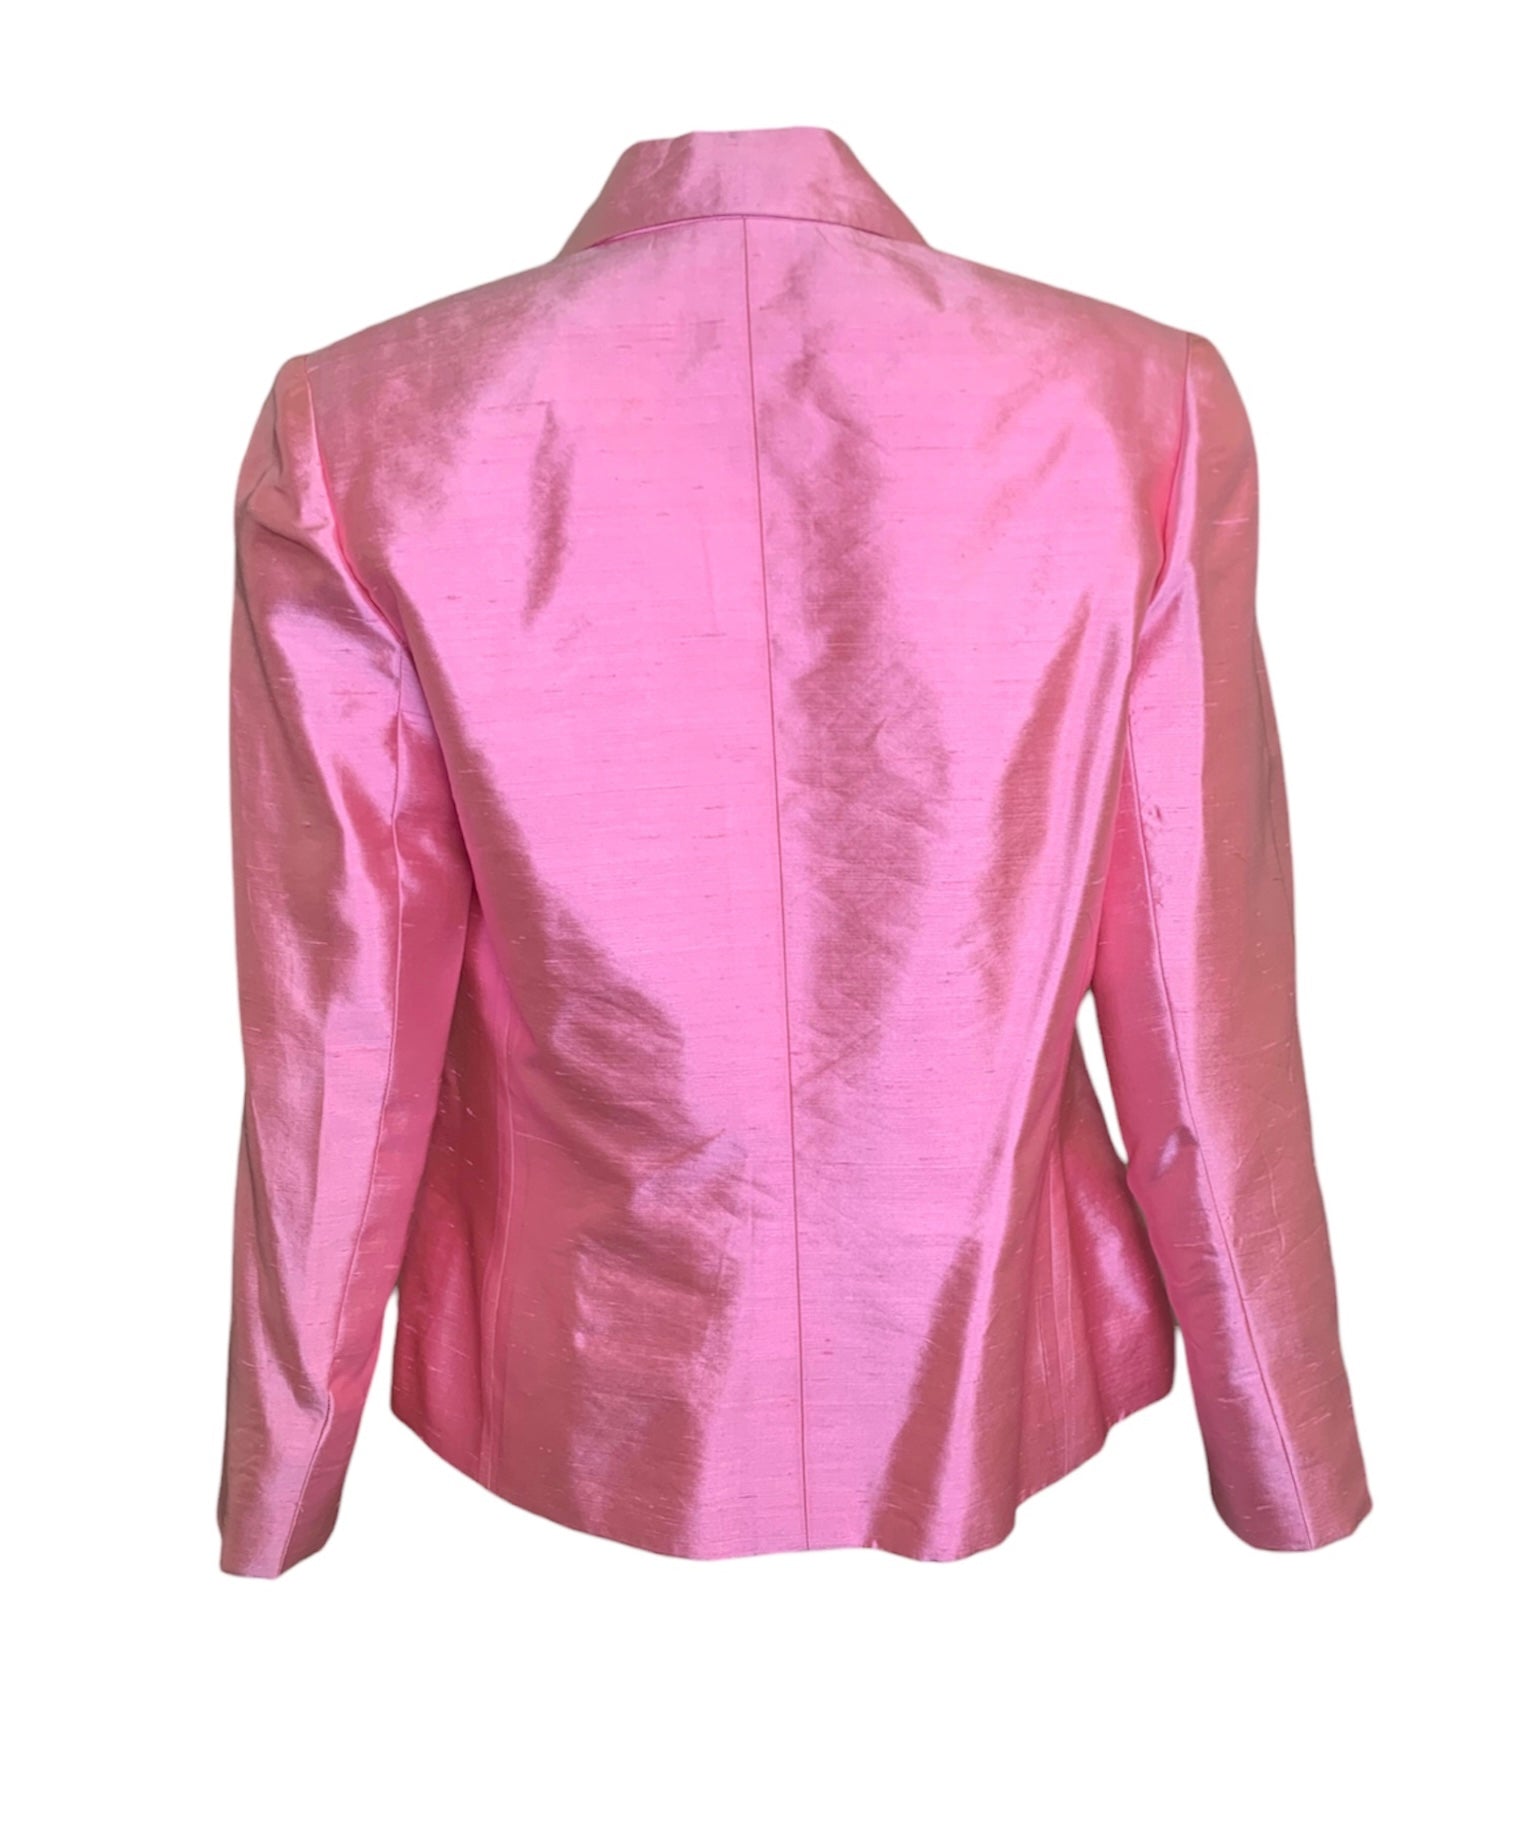  Christian Dior Early 2000s Pink Raw Silk Open Front  Jacket BACK 3 of 5